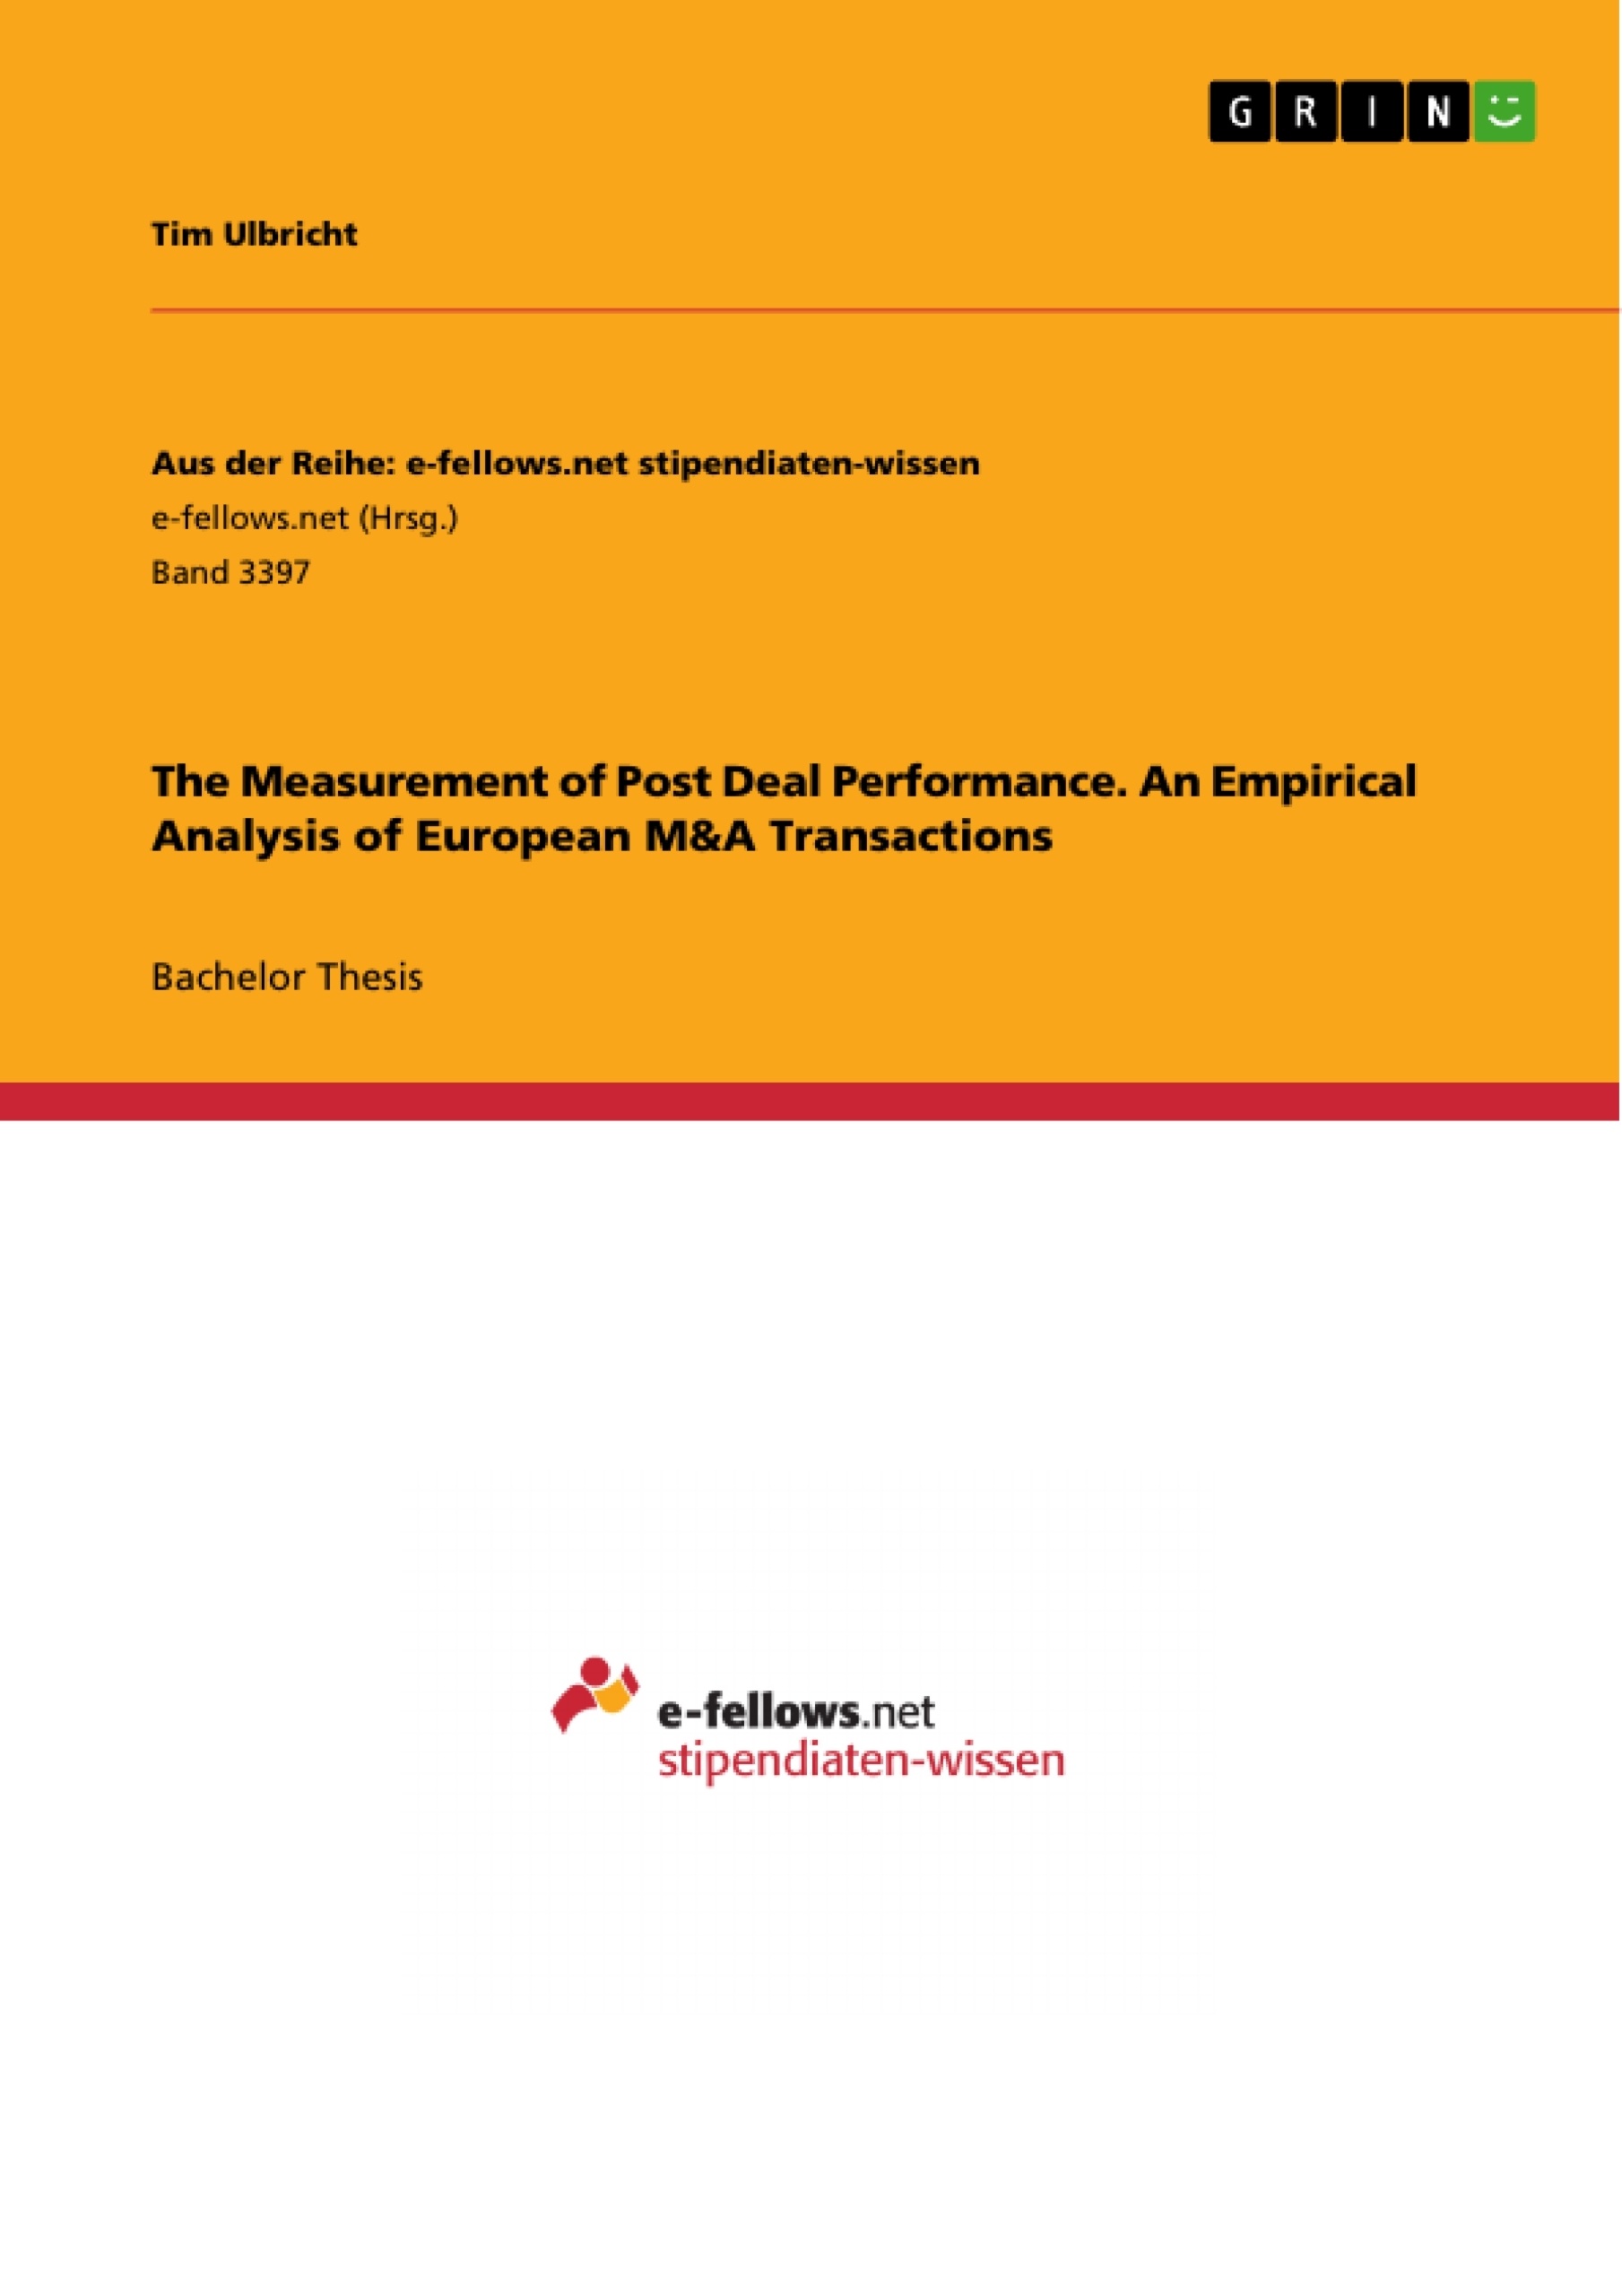 Título: The Measurement of Post Deal Performance. An Empirical Analysis of European M&A Transactions